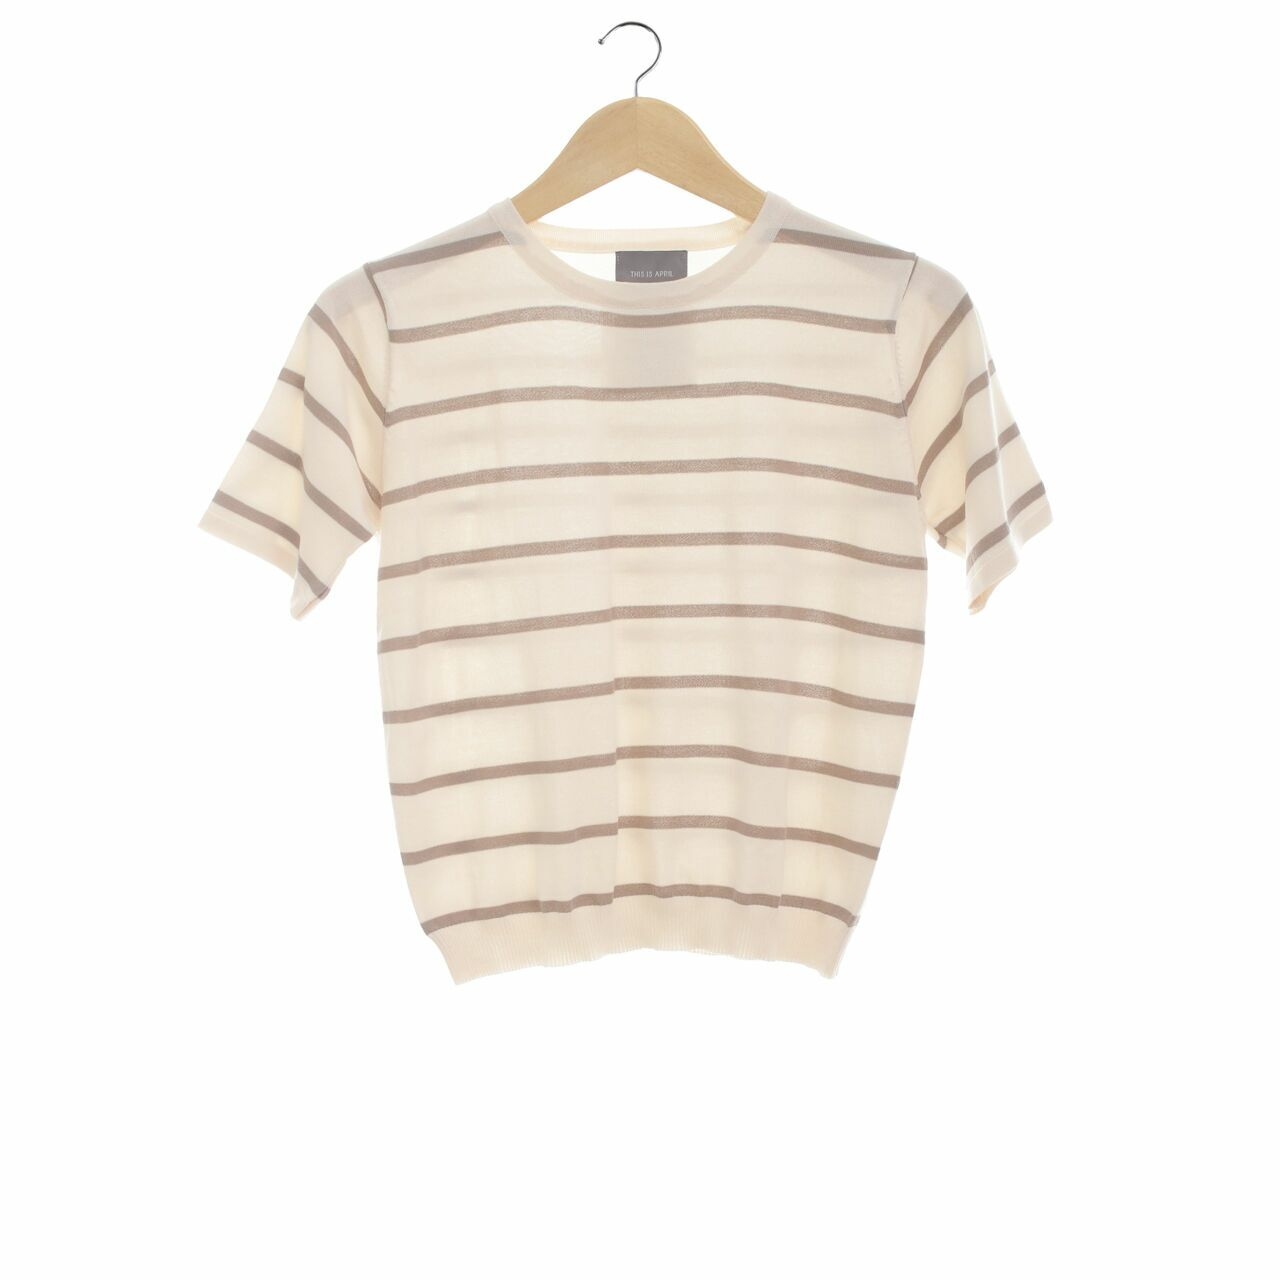 This is April Cream Stripes Knit Blouse